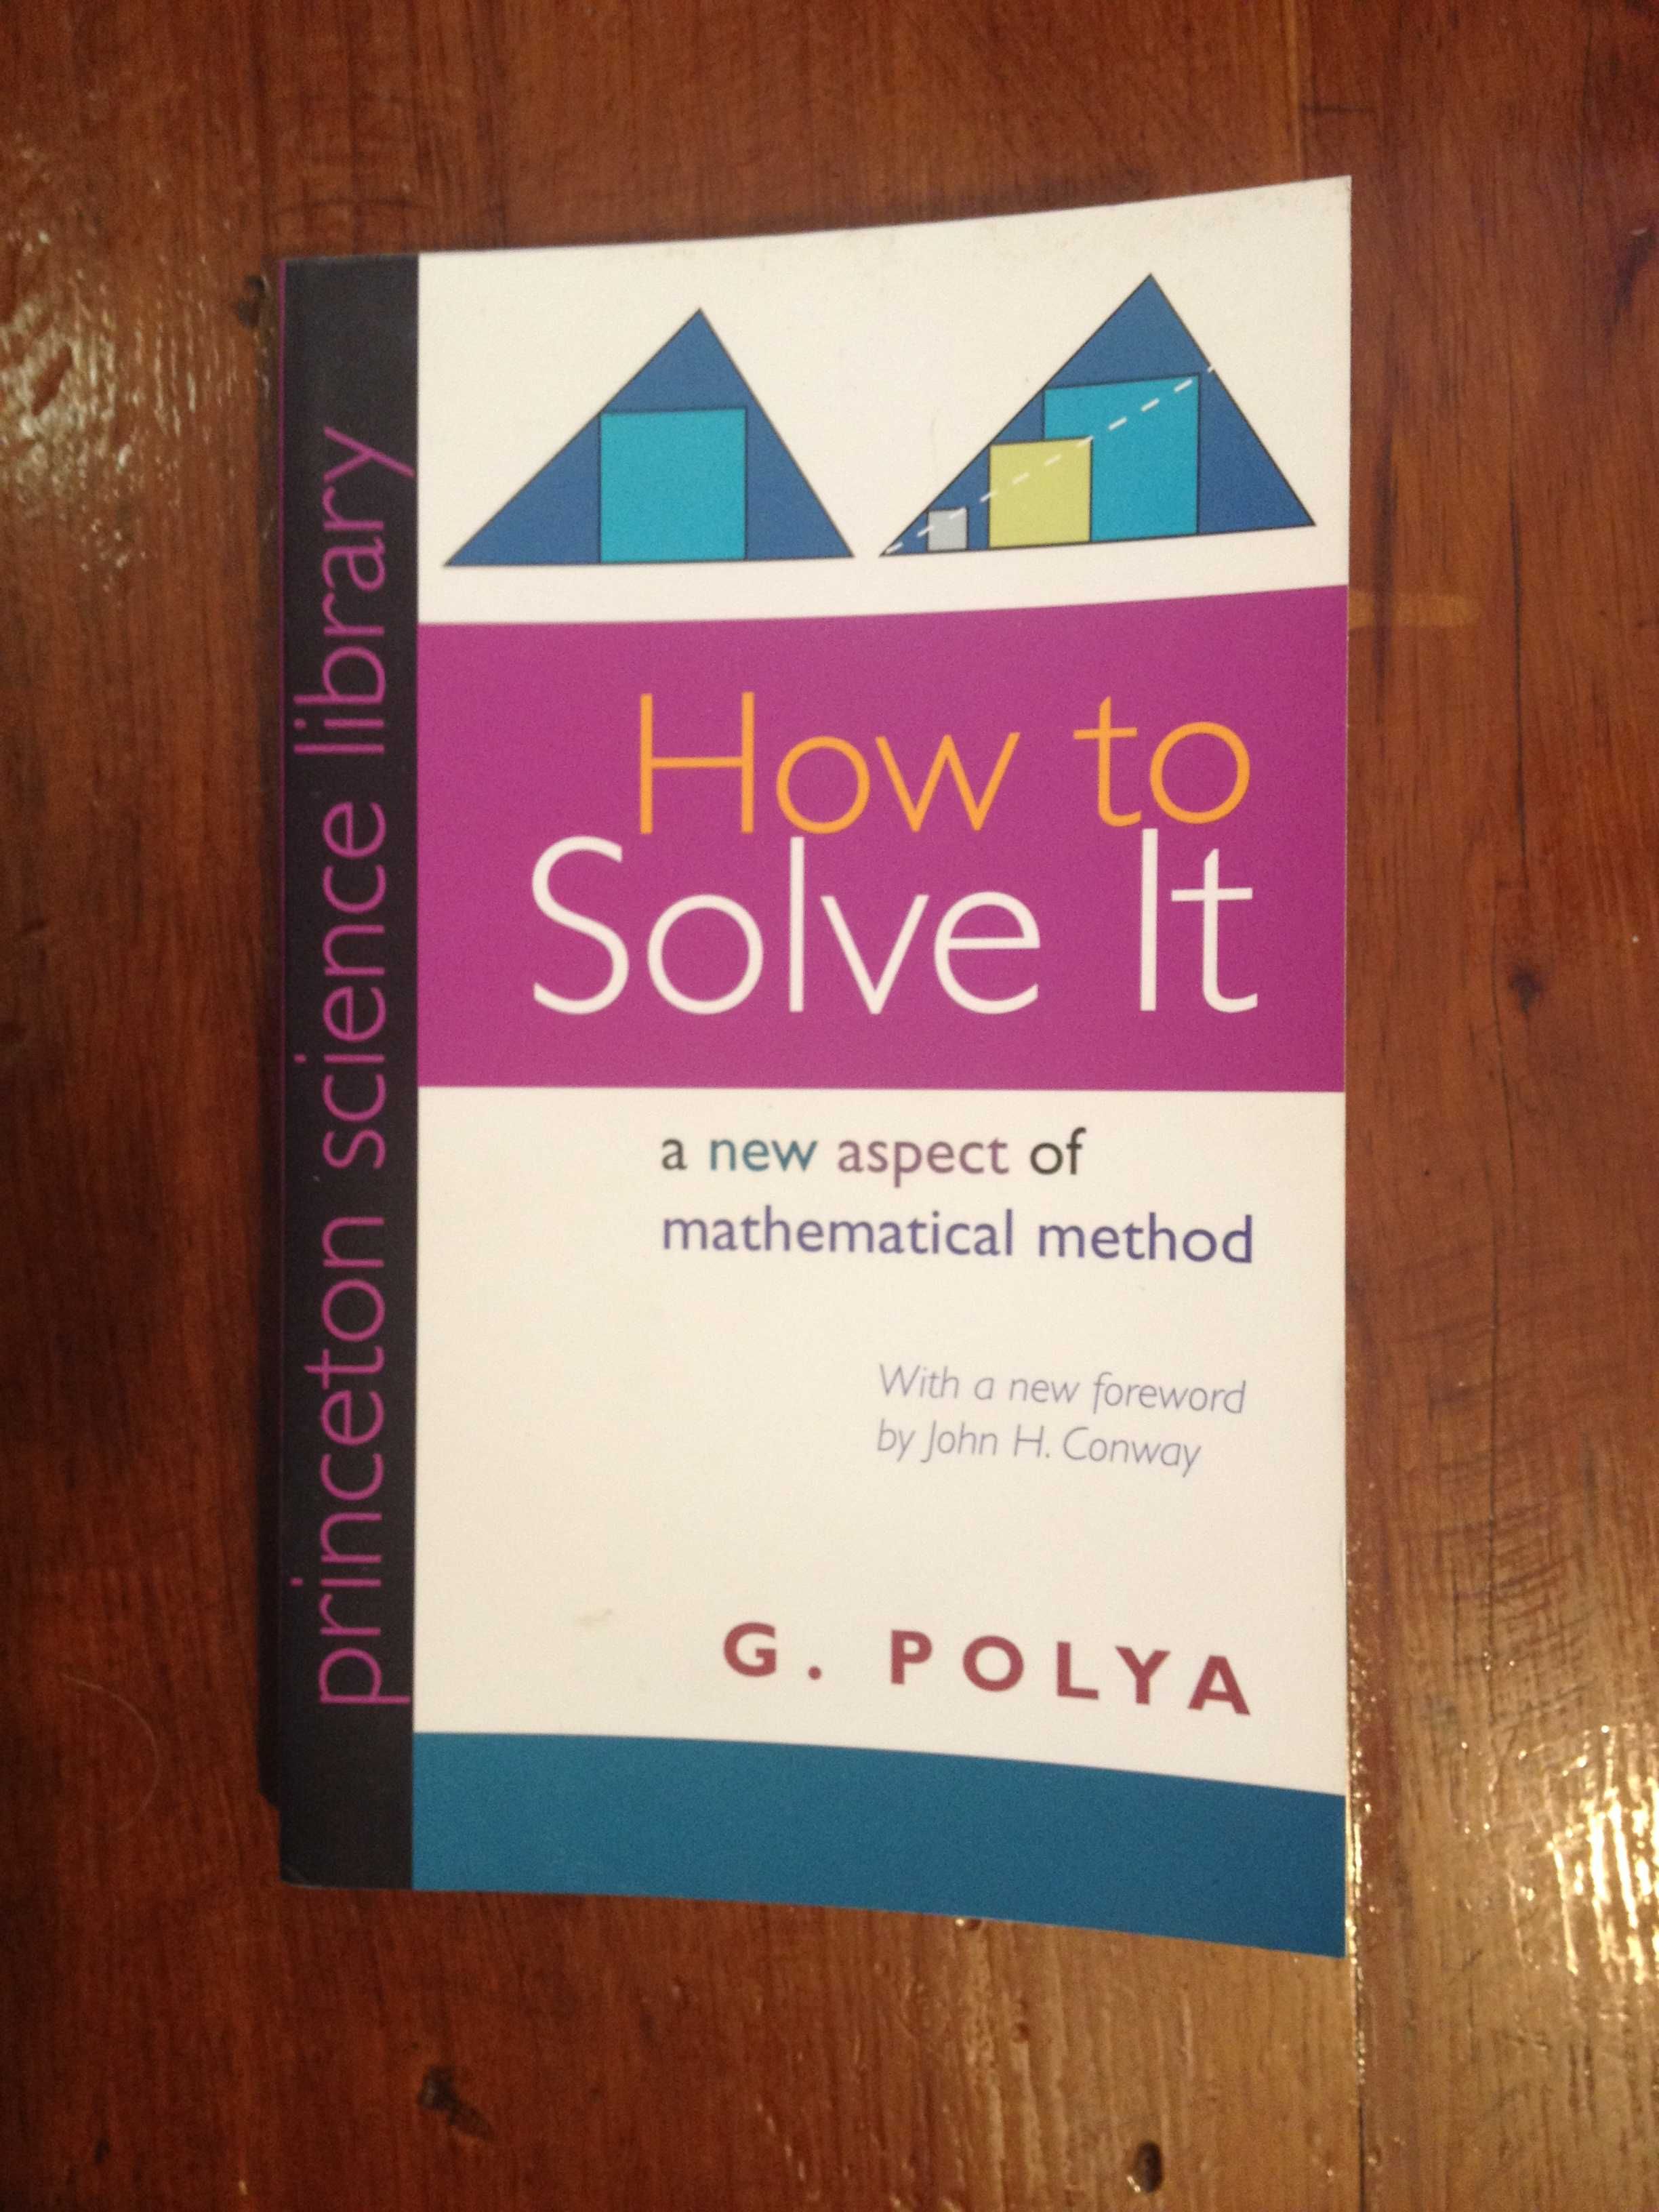 G. Polya - How to solve it